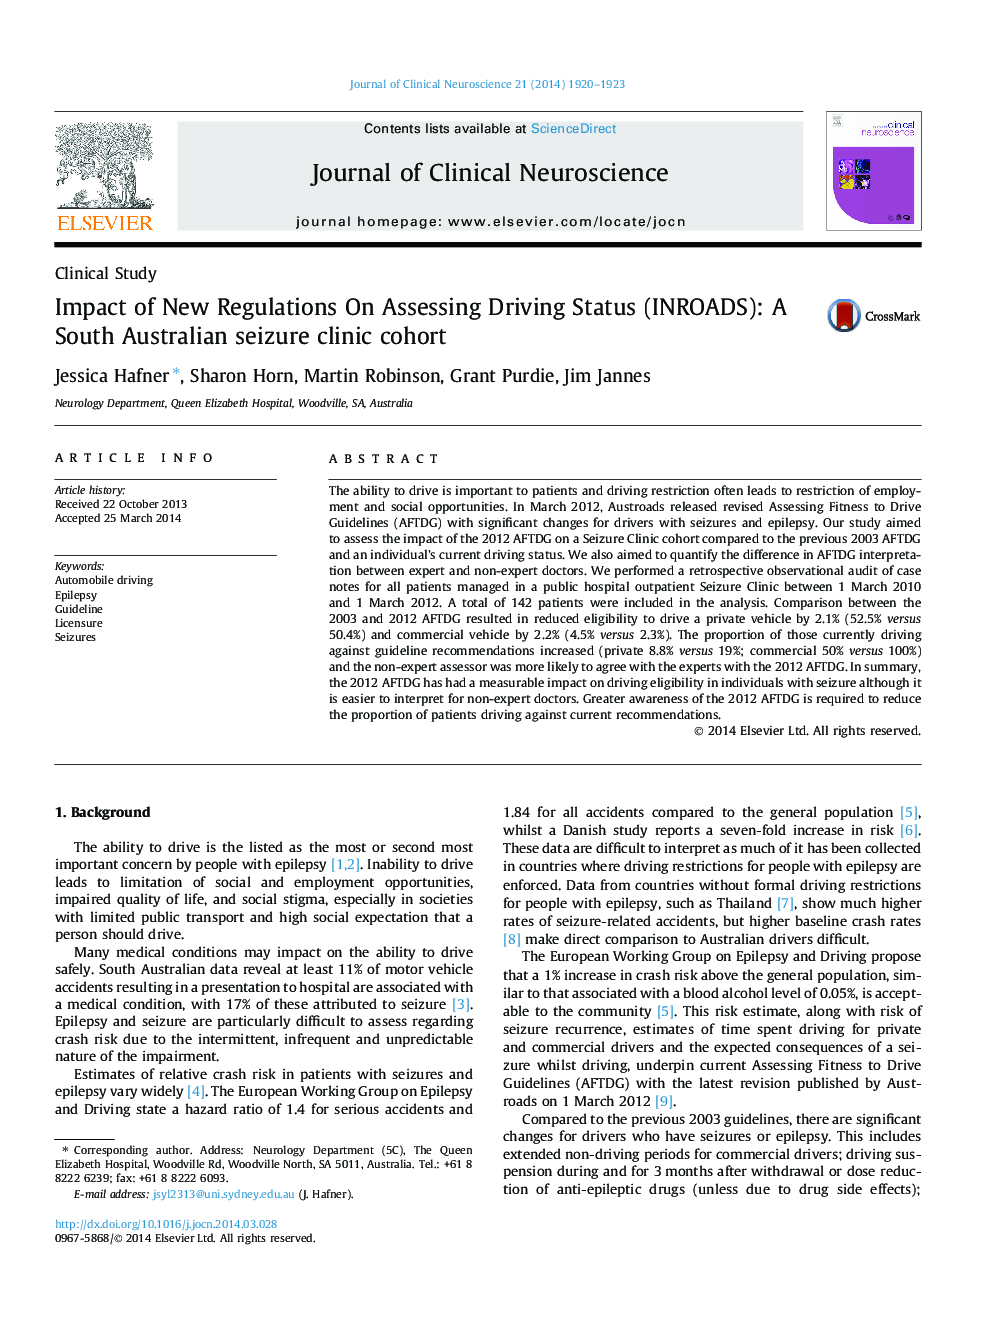 Impact of New Regulations On Assessing Driving Status (INROADS): A South Australian seizure clinic cohort